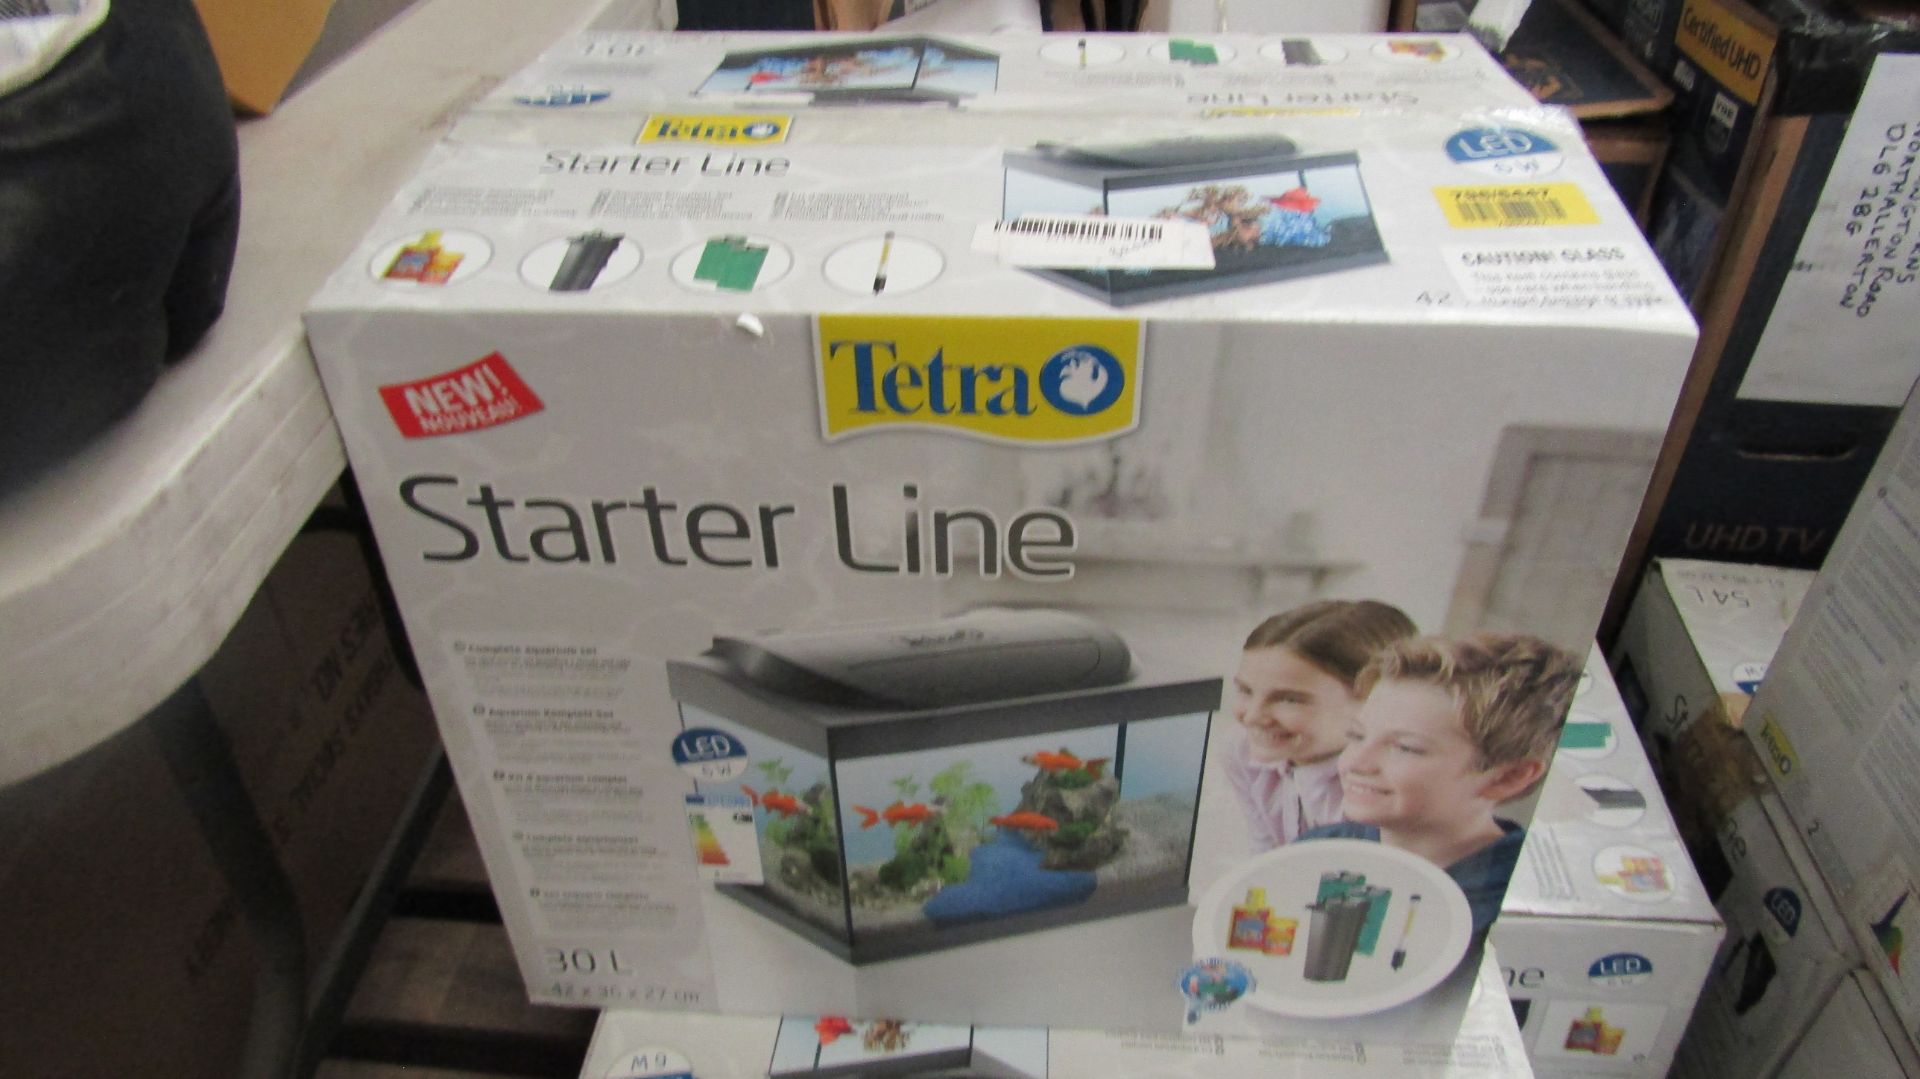 Tetra 30L Starter Line, Boxed and unchecked, RRP £59.99.